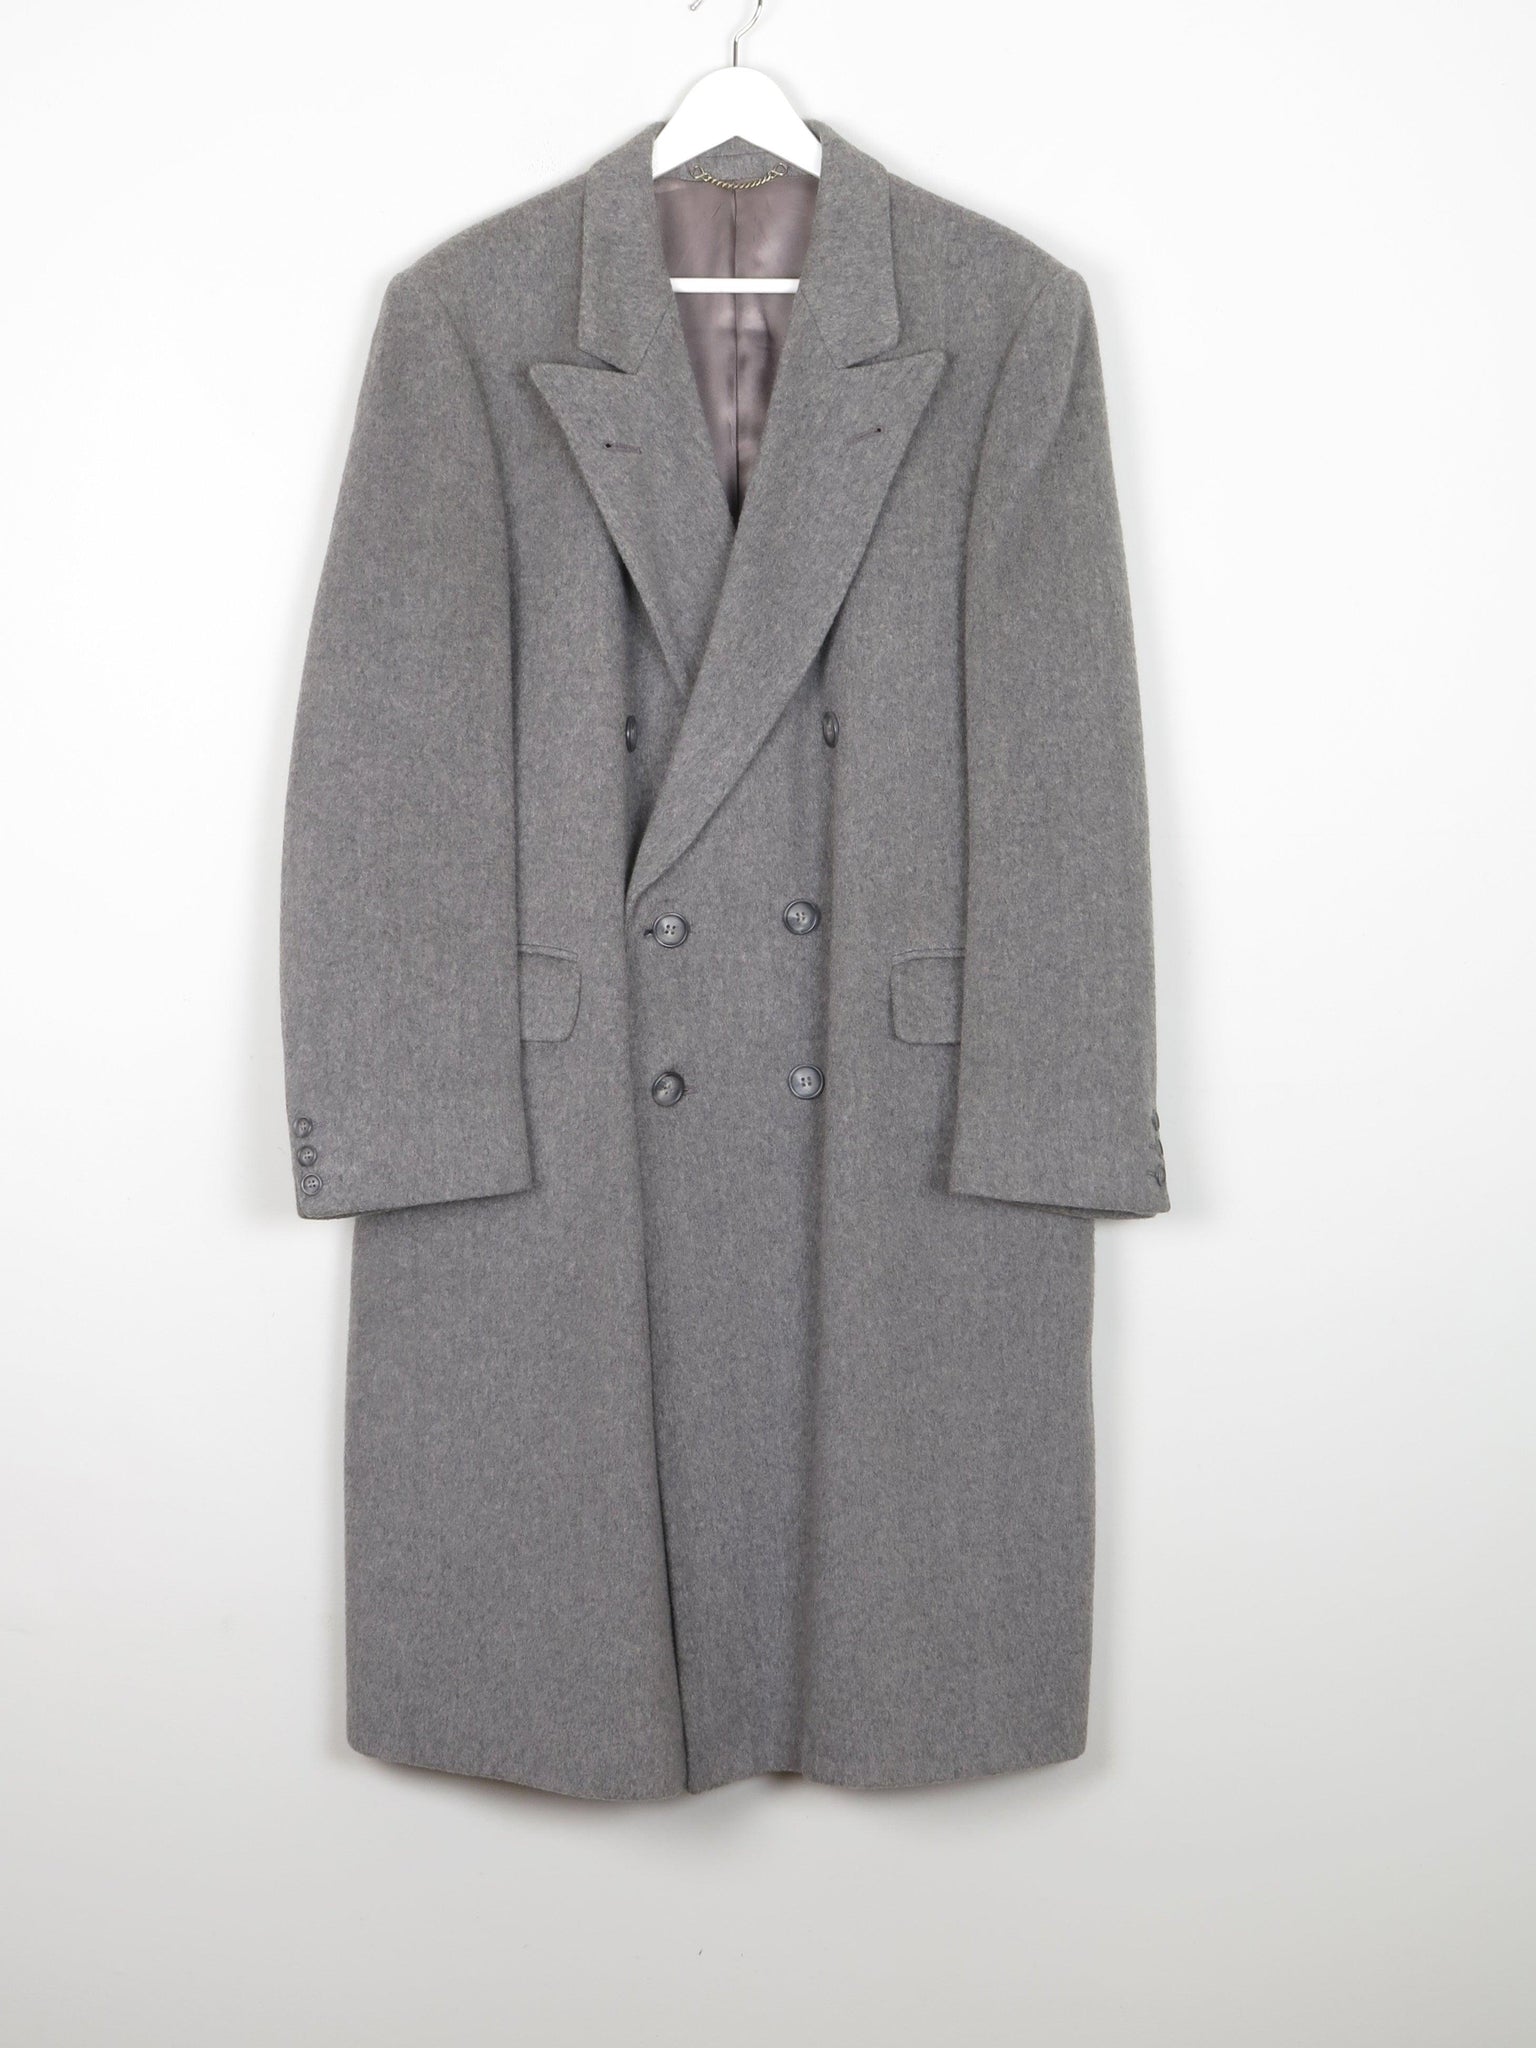 Men's 100% Cashmere Double Breasted Grey Wool Coat M - The Harlequin